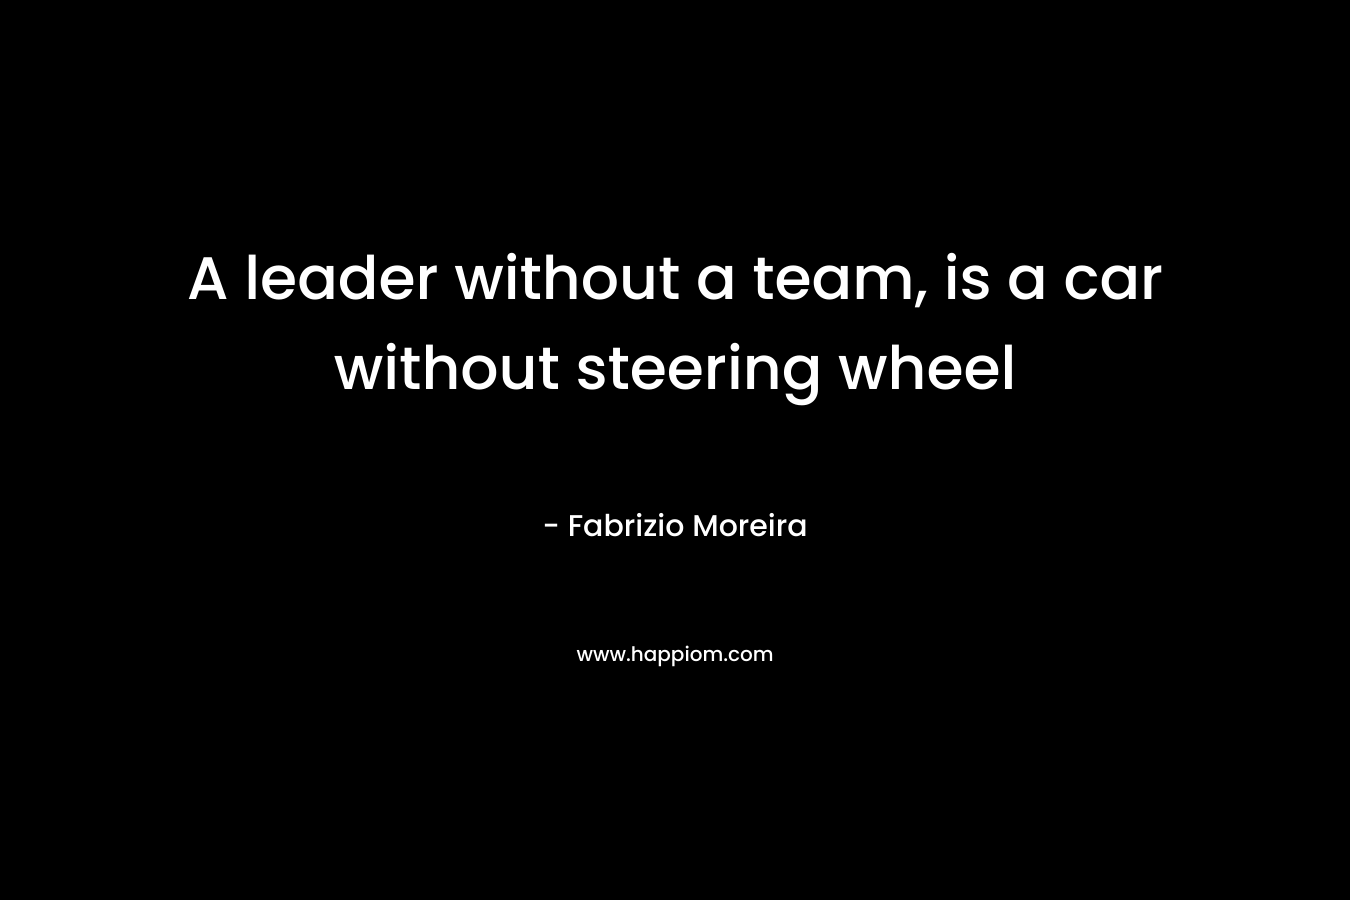 A leader without a team, is a car without steering wheel